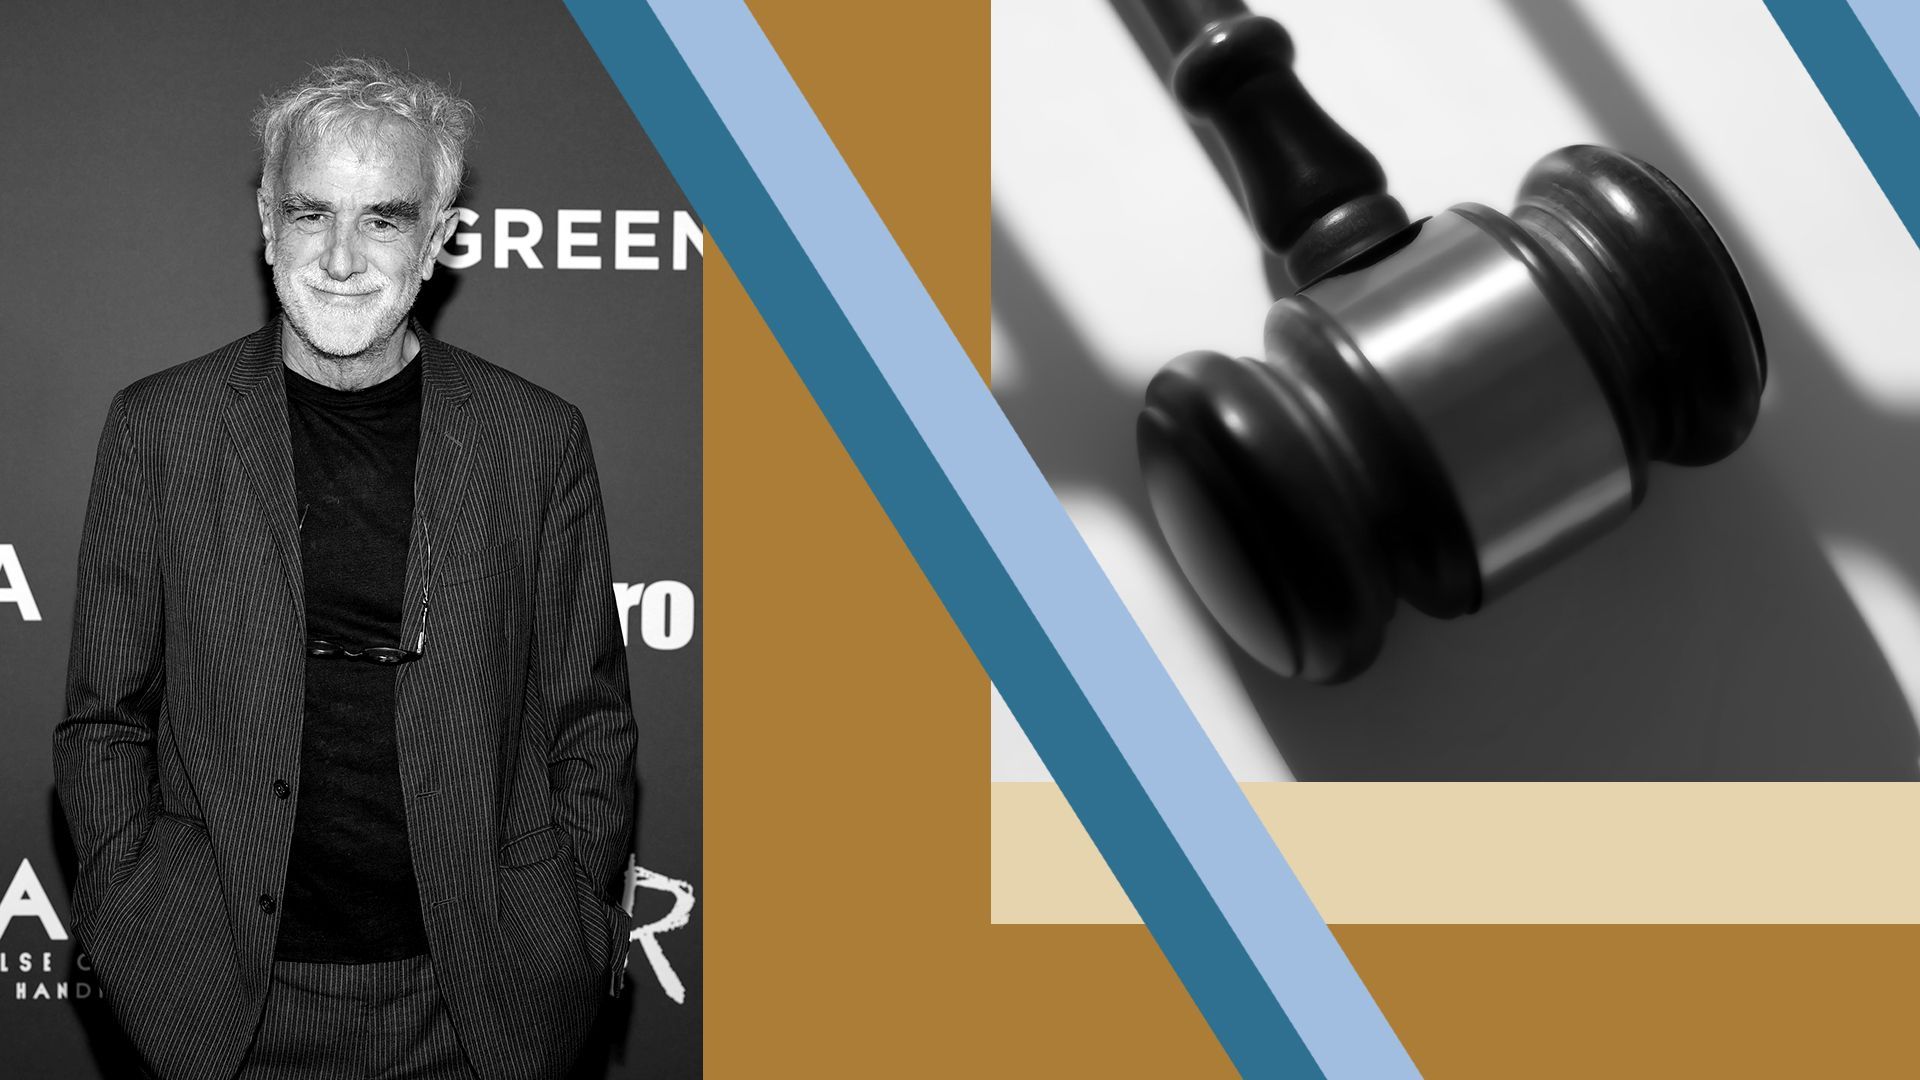 Photo illustration of Luis Moreno Ocampo set against graphic shapes and a photo of a gavel